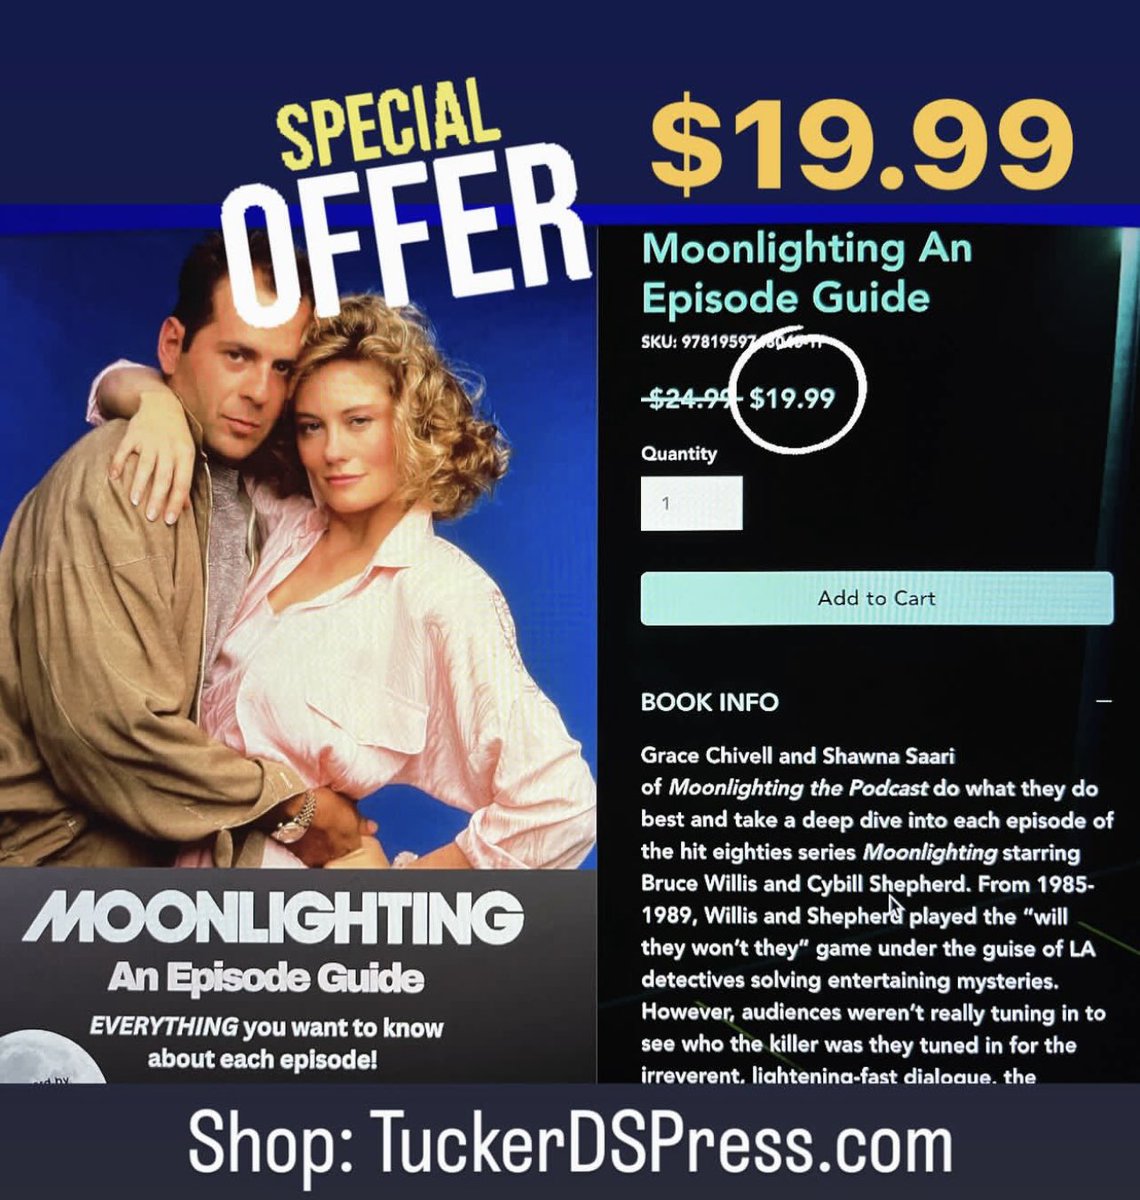 Get your copy at tuckerdspress.com along with so many other great titles! @ScottLuckStory @BlueRoseMag1 @ChivellGrace @shawnasaari #moonlightinganepisodeguide #books #moonlightingthepodcast